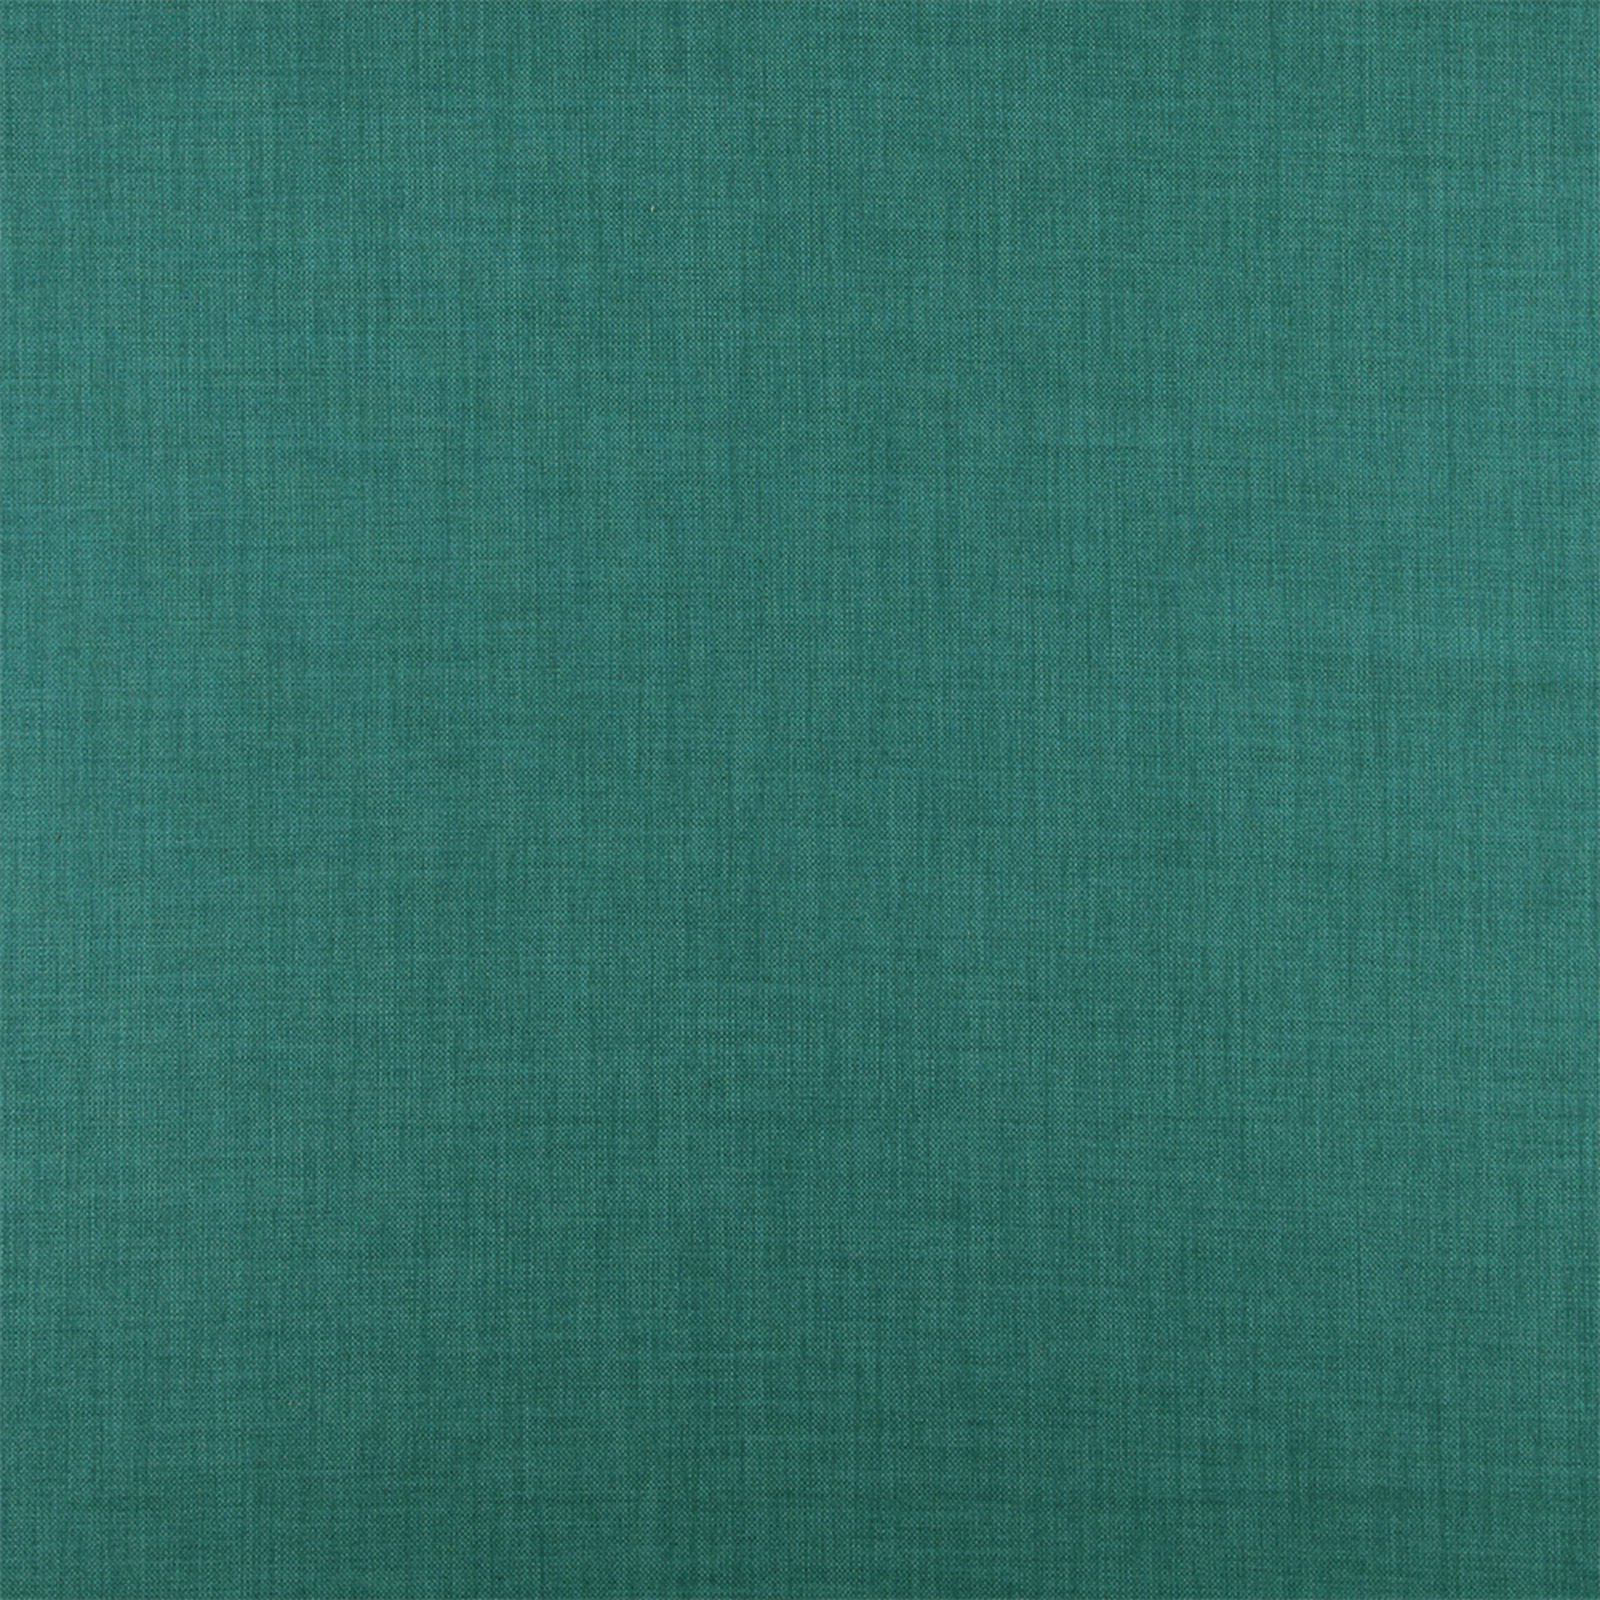 Upholstery fabric dark turquoise 820973_pack_sp